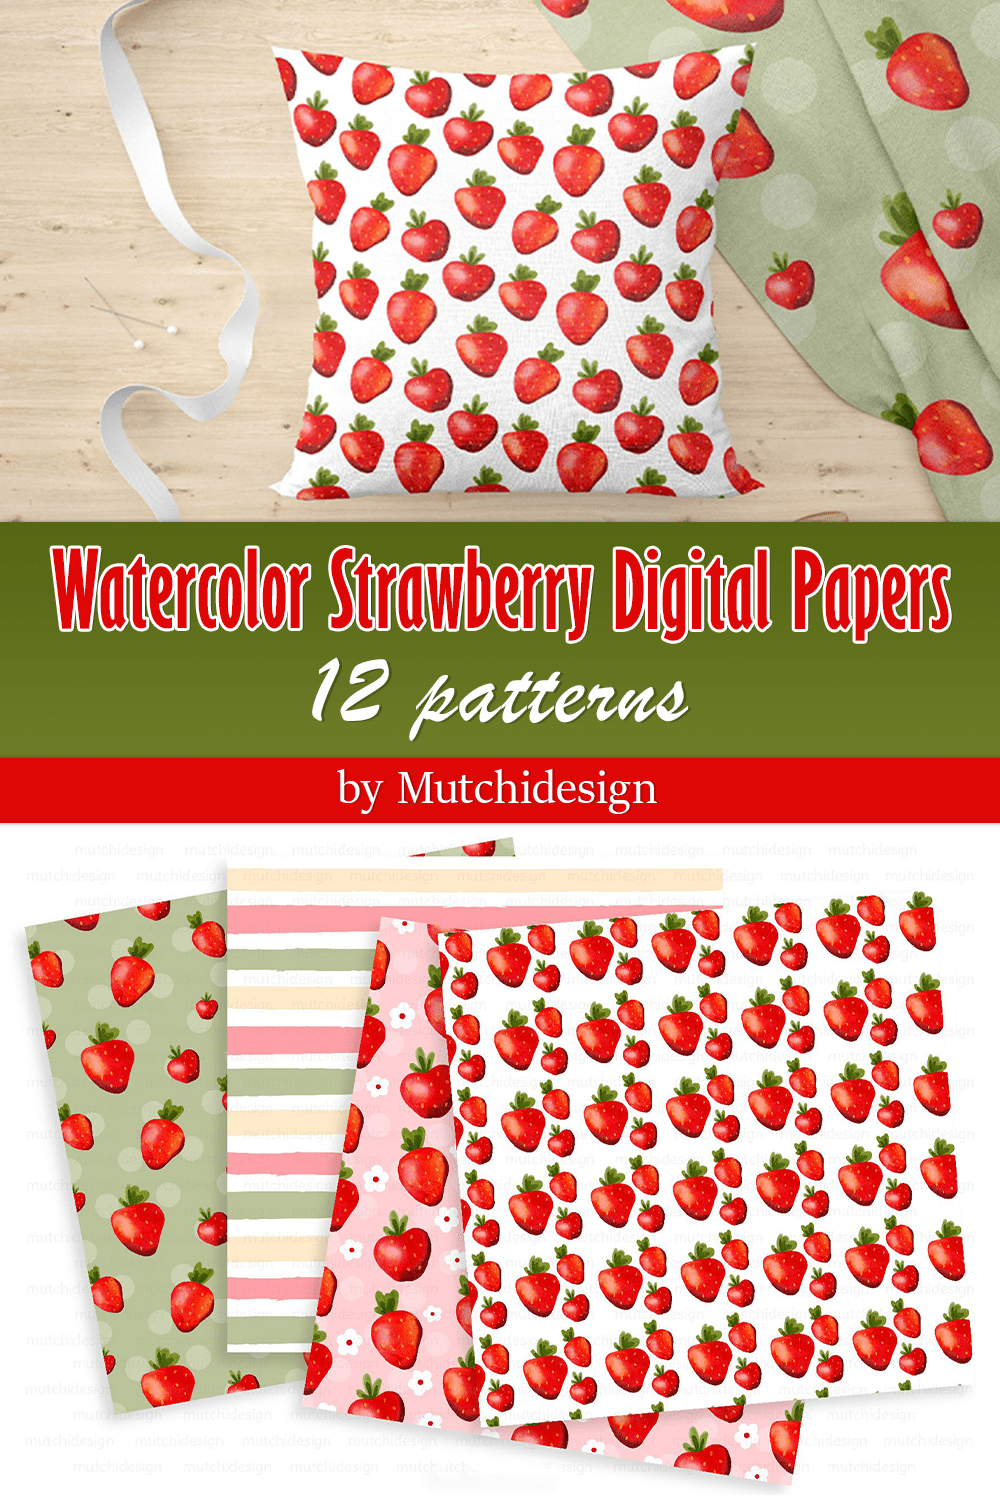 Watercolor Strawberry Digital Papers - pinterest image preview.